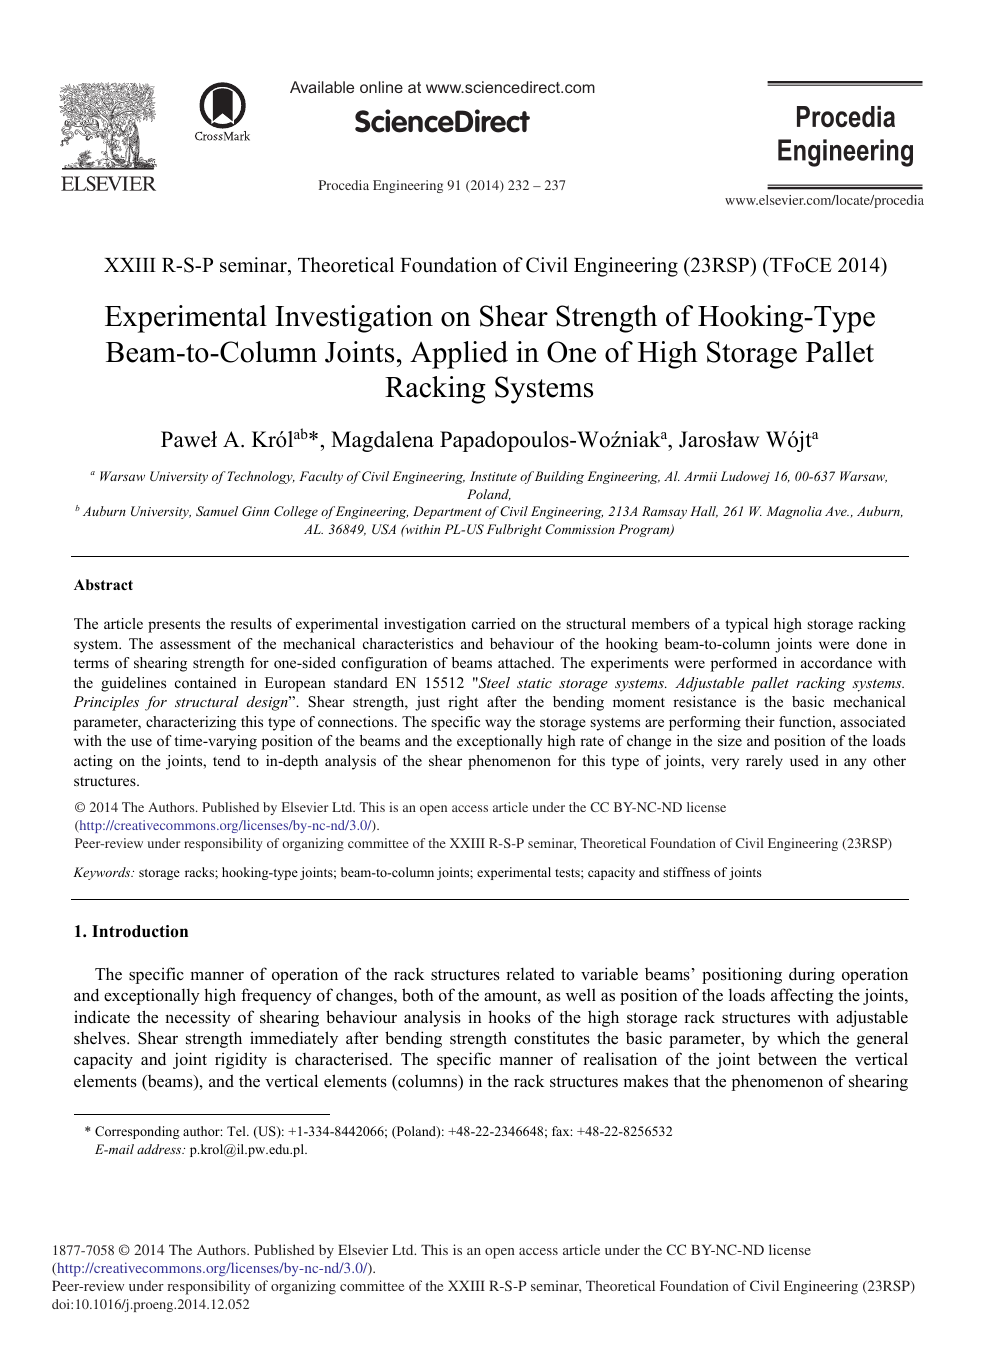 Experimental Investigation On Shear Strength Of Hooking Type Beam To Column Joints Applied In One Of High Storage Pallet Racking Systems Topic Of Research Paper In Materials Engineering Download Scholarly Article Pdf And Read